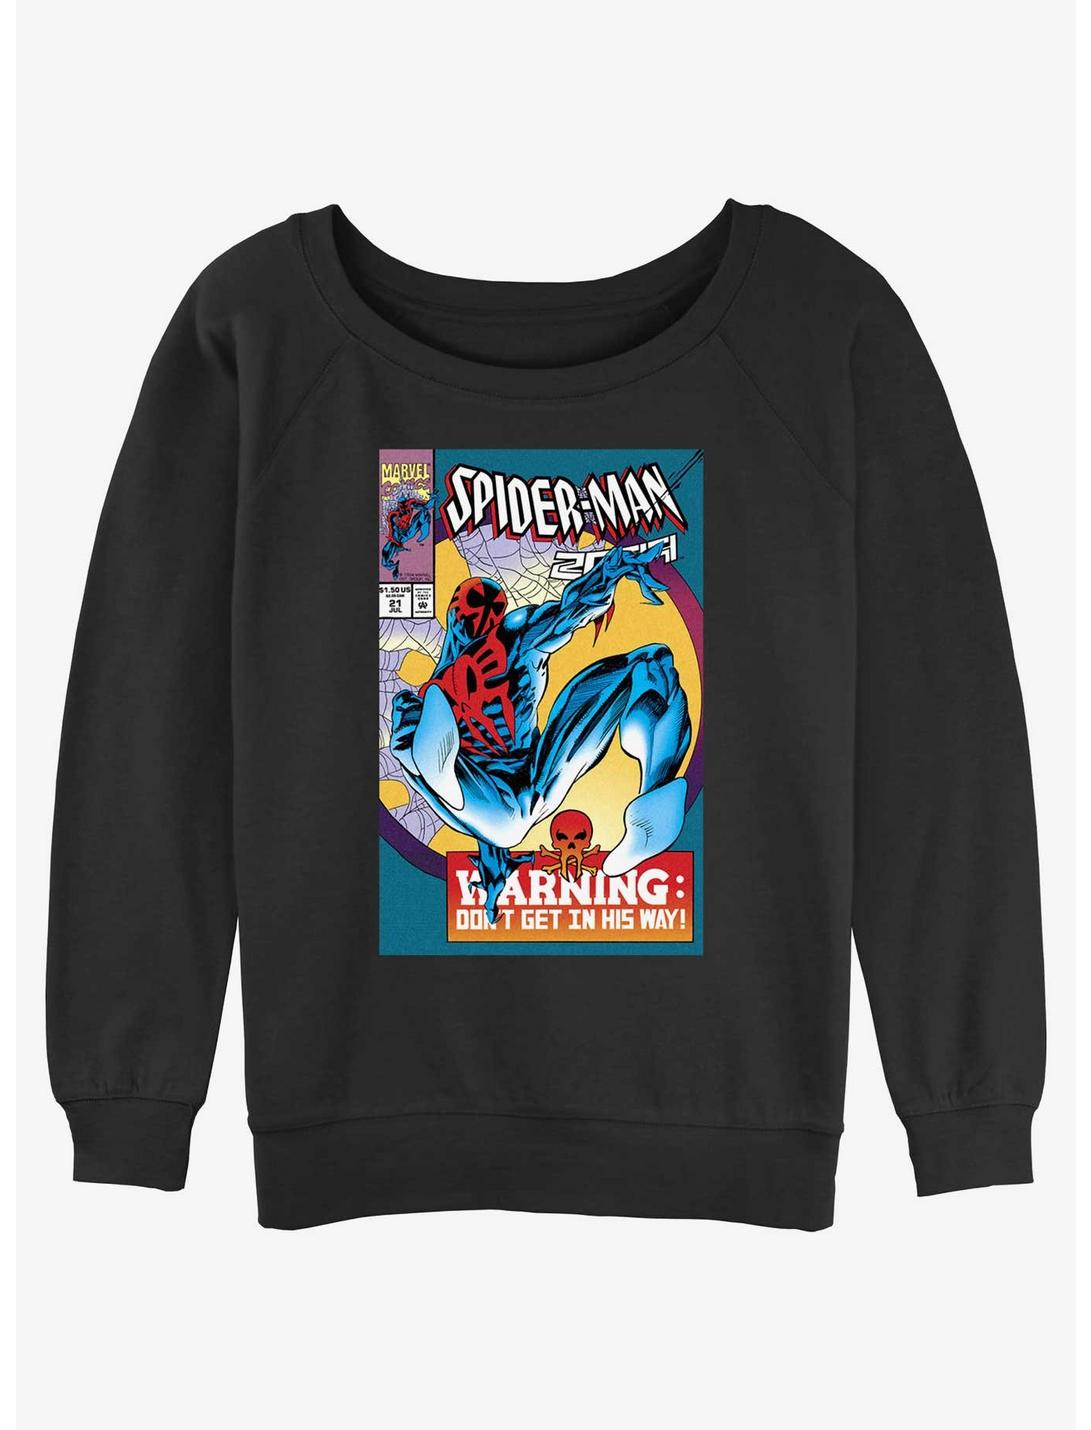 Marvel Spider-Man: Across the Spider-Verse O'Hara 2099 Comic Cover Womens Slouchy Sweatshirt, BLACK, hi-res